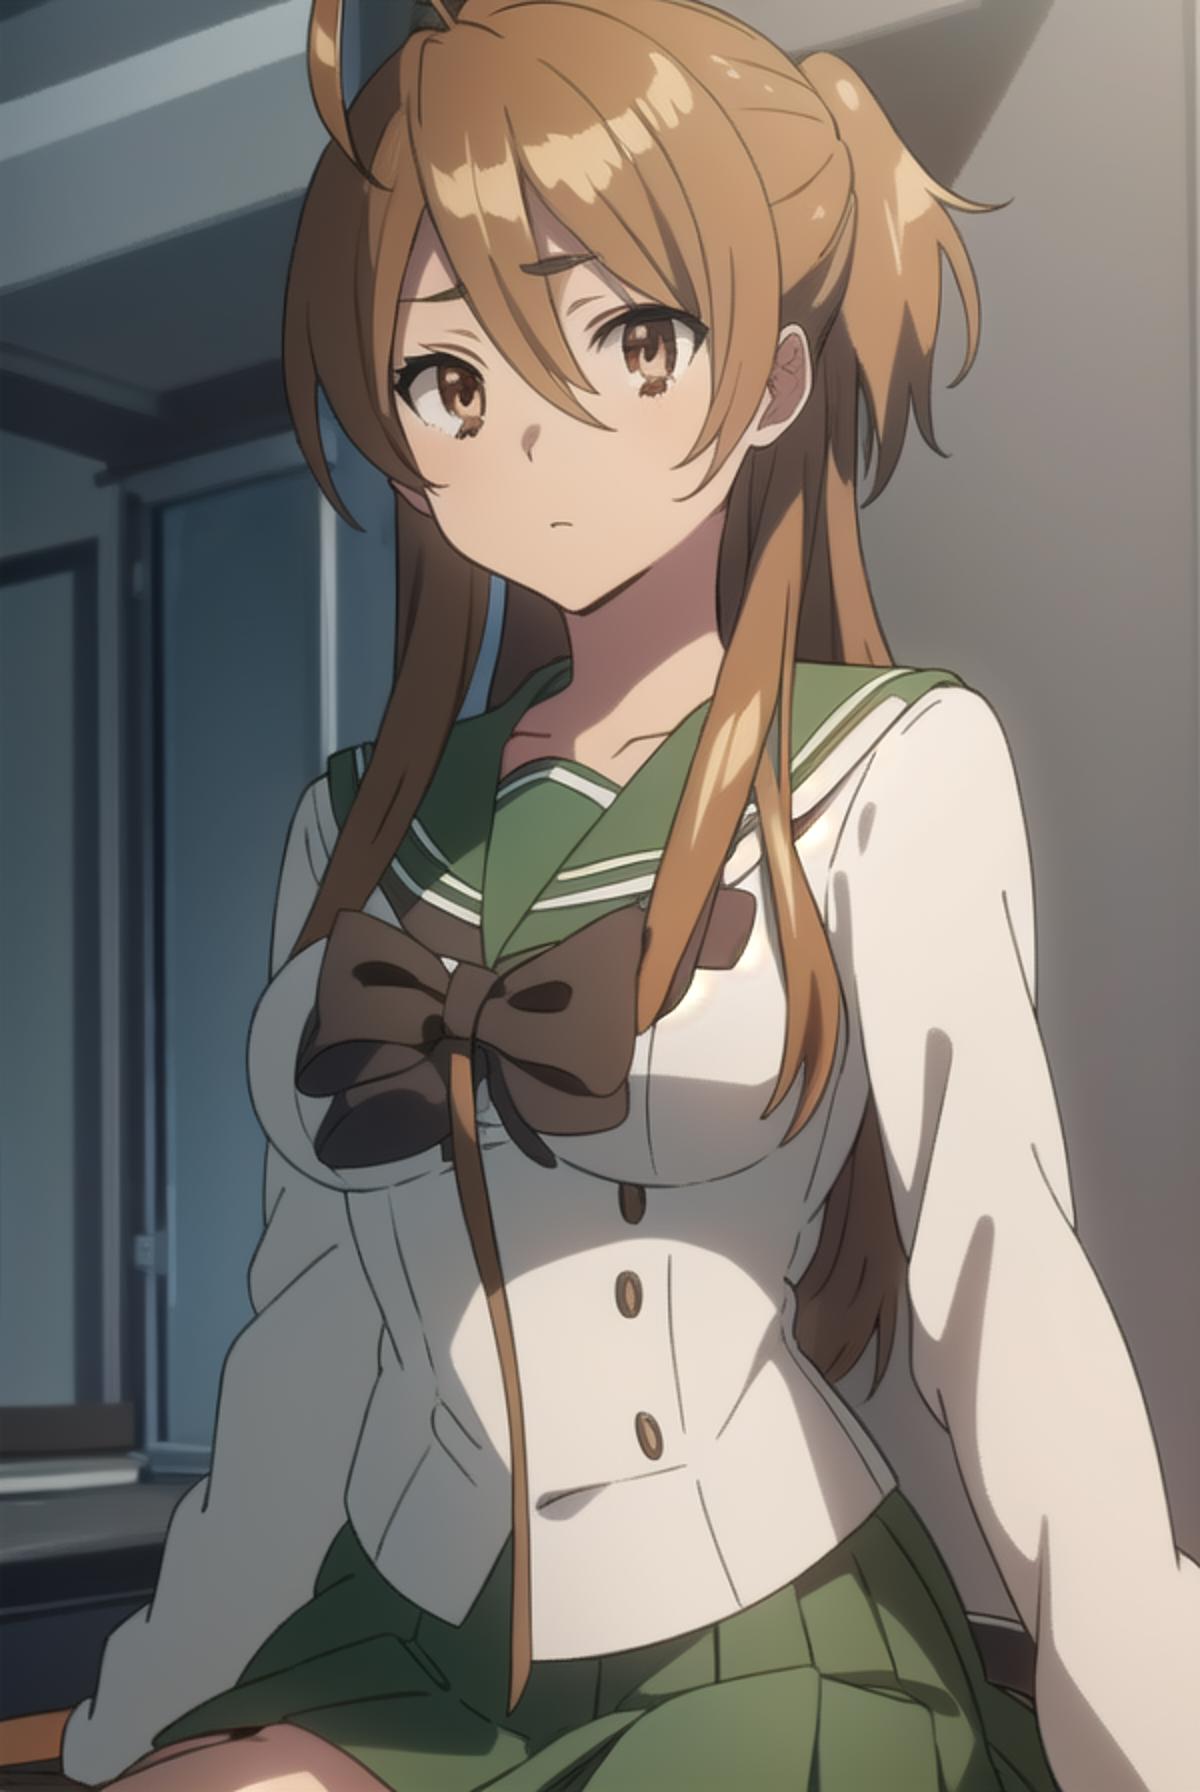 Highschool Of The Dead Returns?! (Not really, but) - The